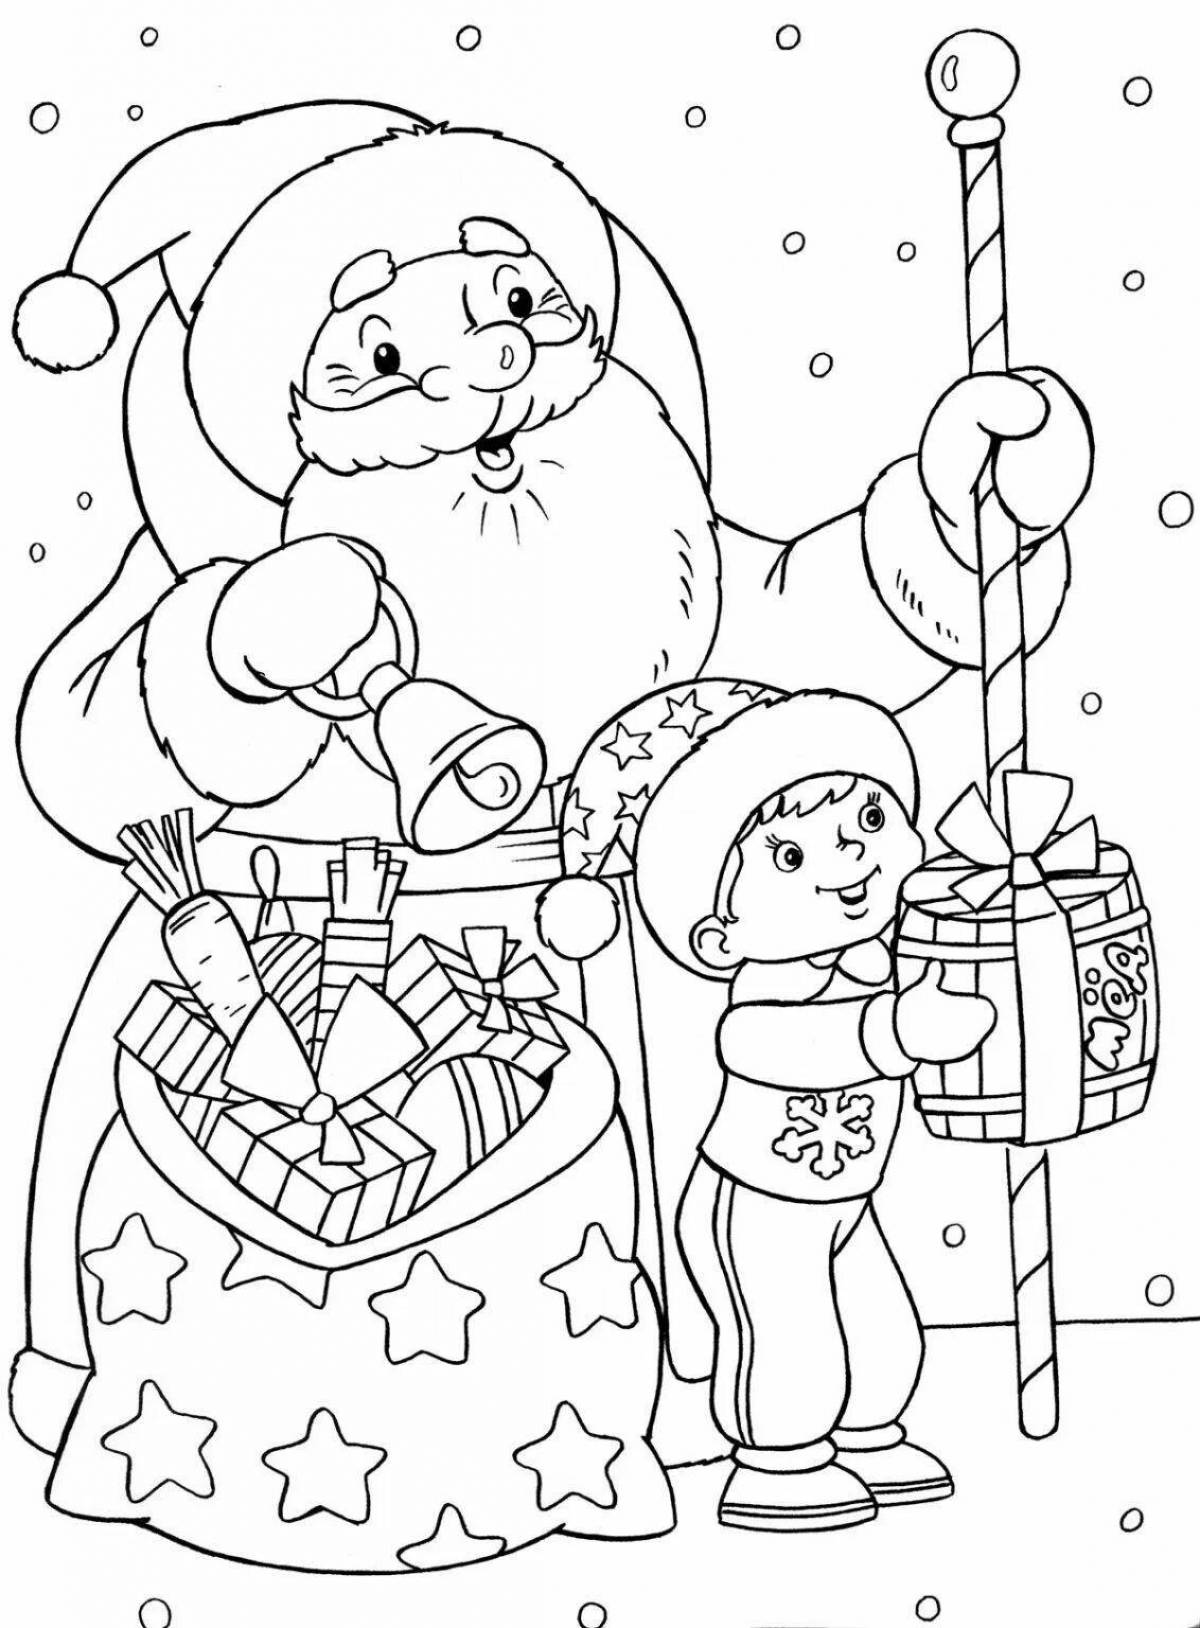 Crazy Christmas coloring book for kids 8-9 years old